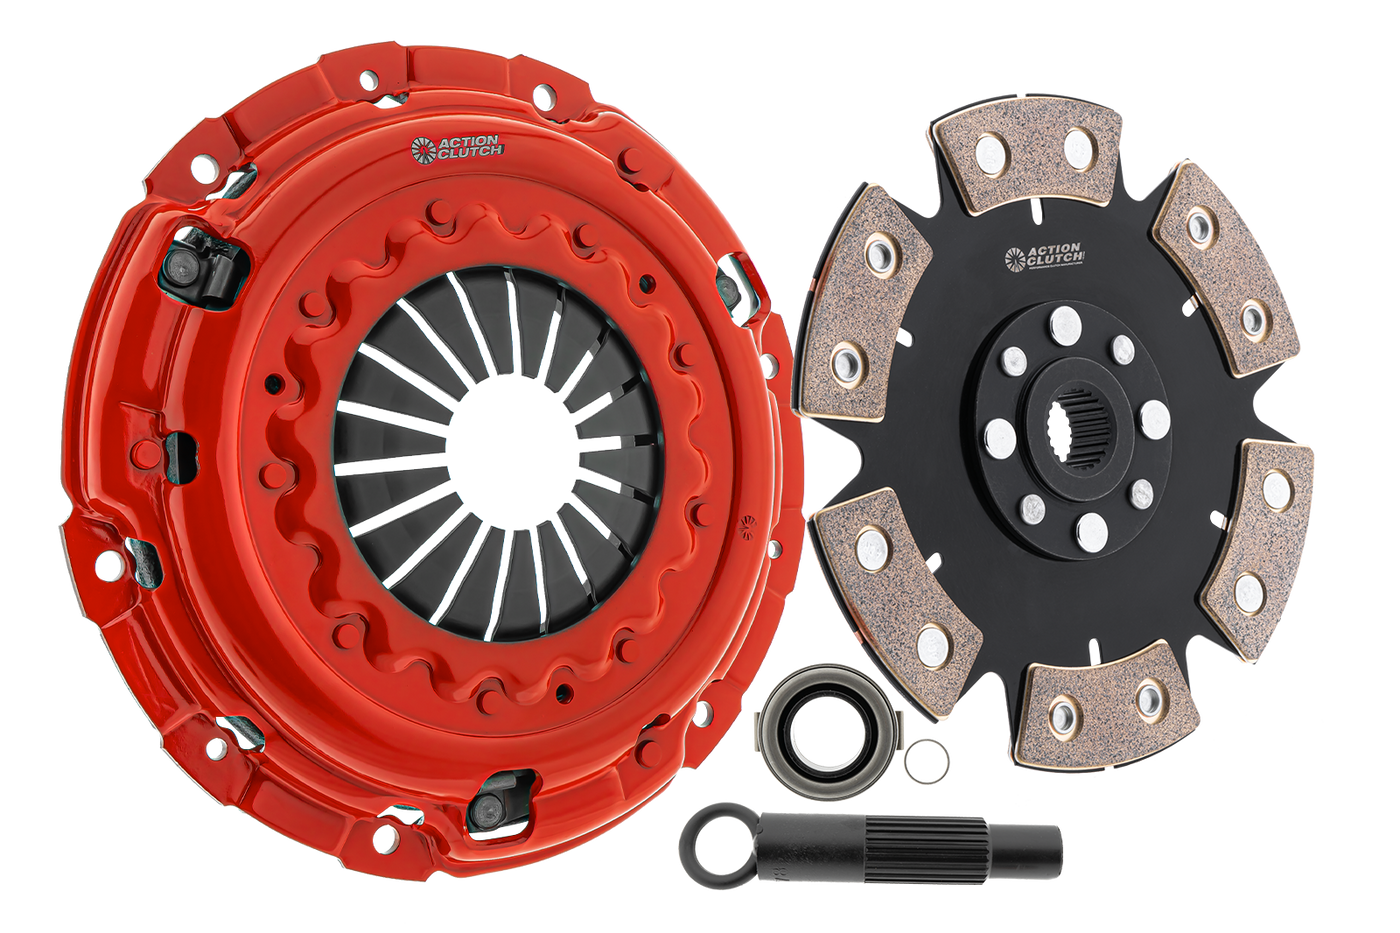 Stage 6 Clutch Kit (2MD) for Nissan 350Z 2007-2008 3.5L (VQ35HR) Without Heavy Duty Concentric Slave Cylinder